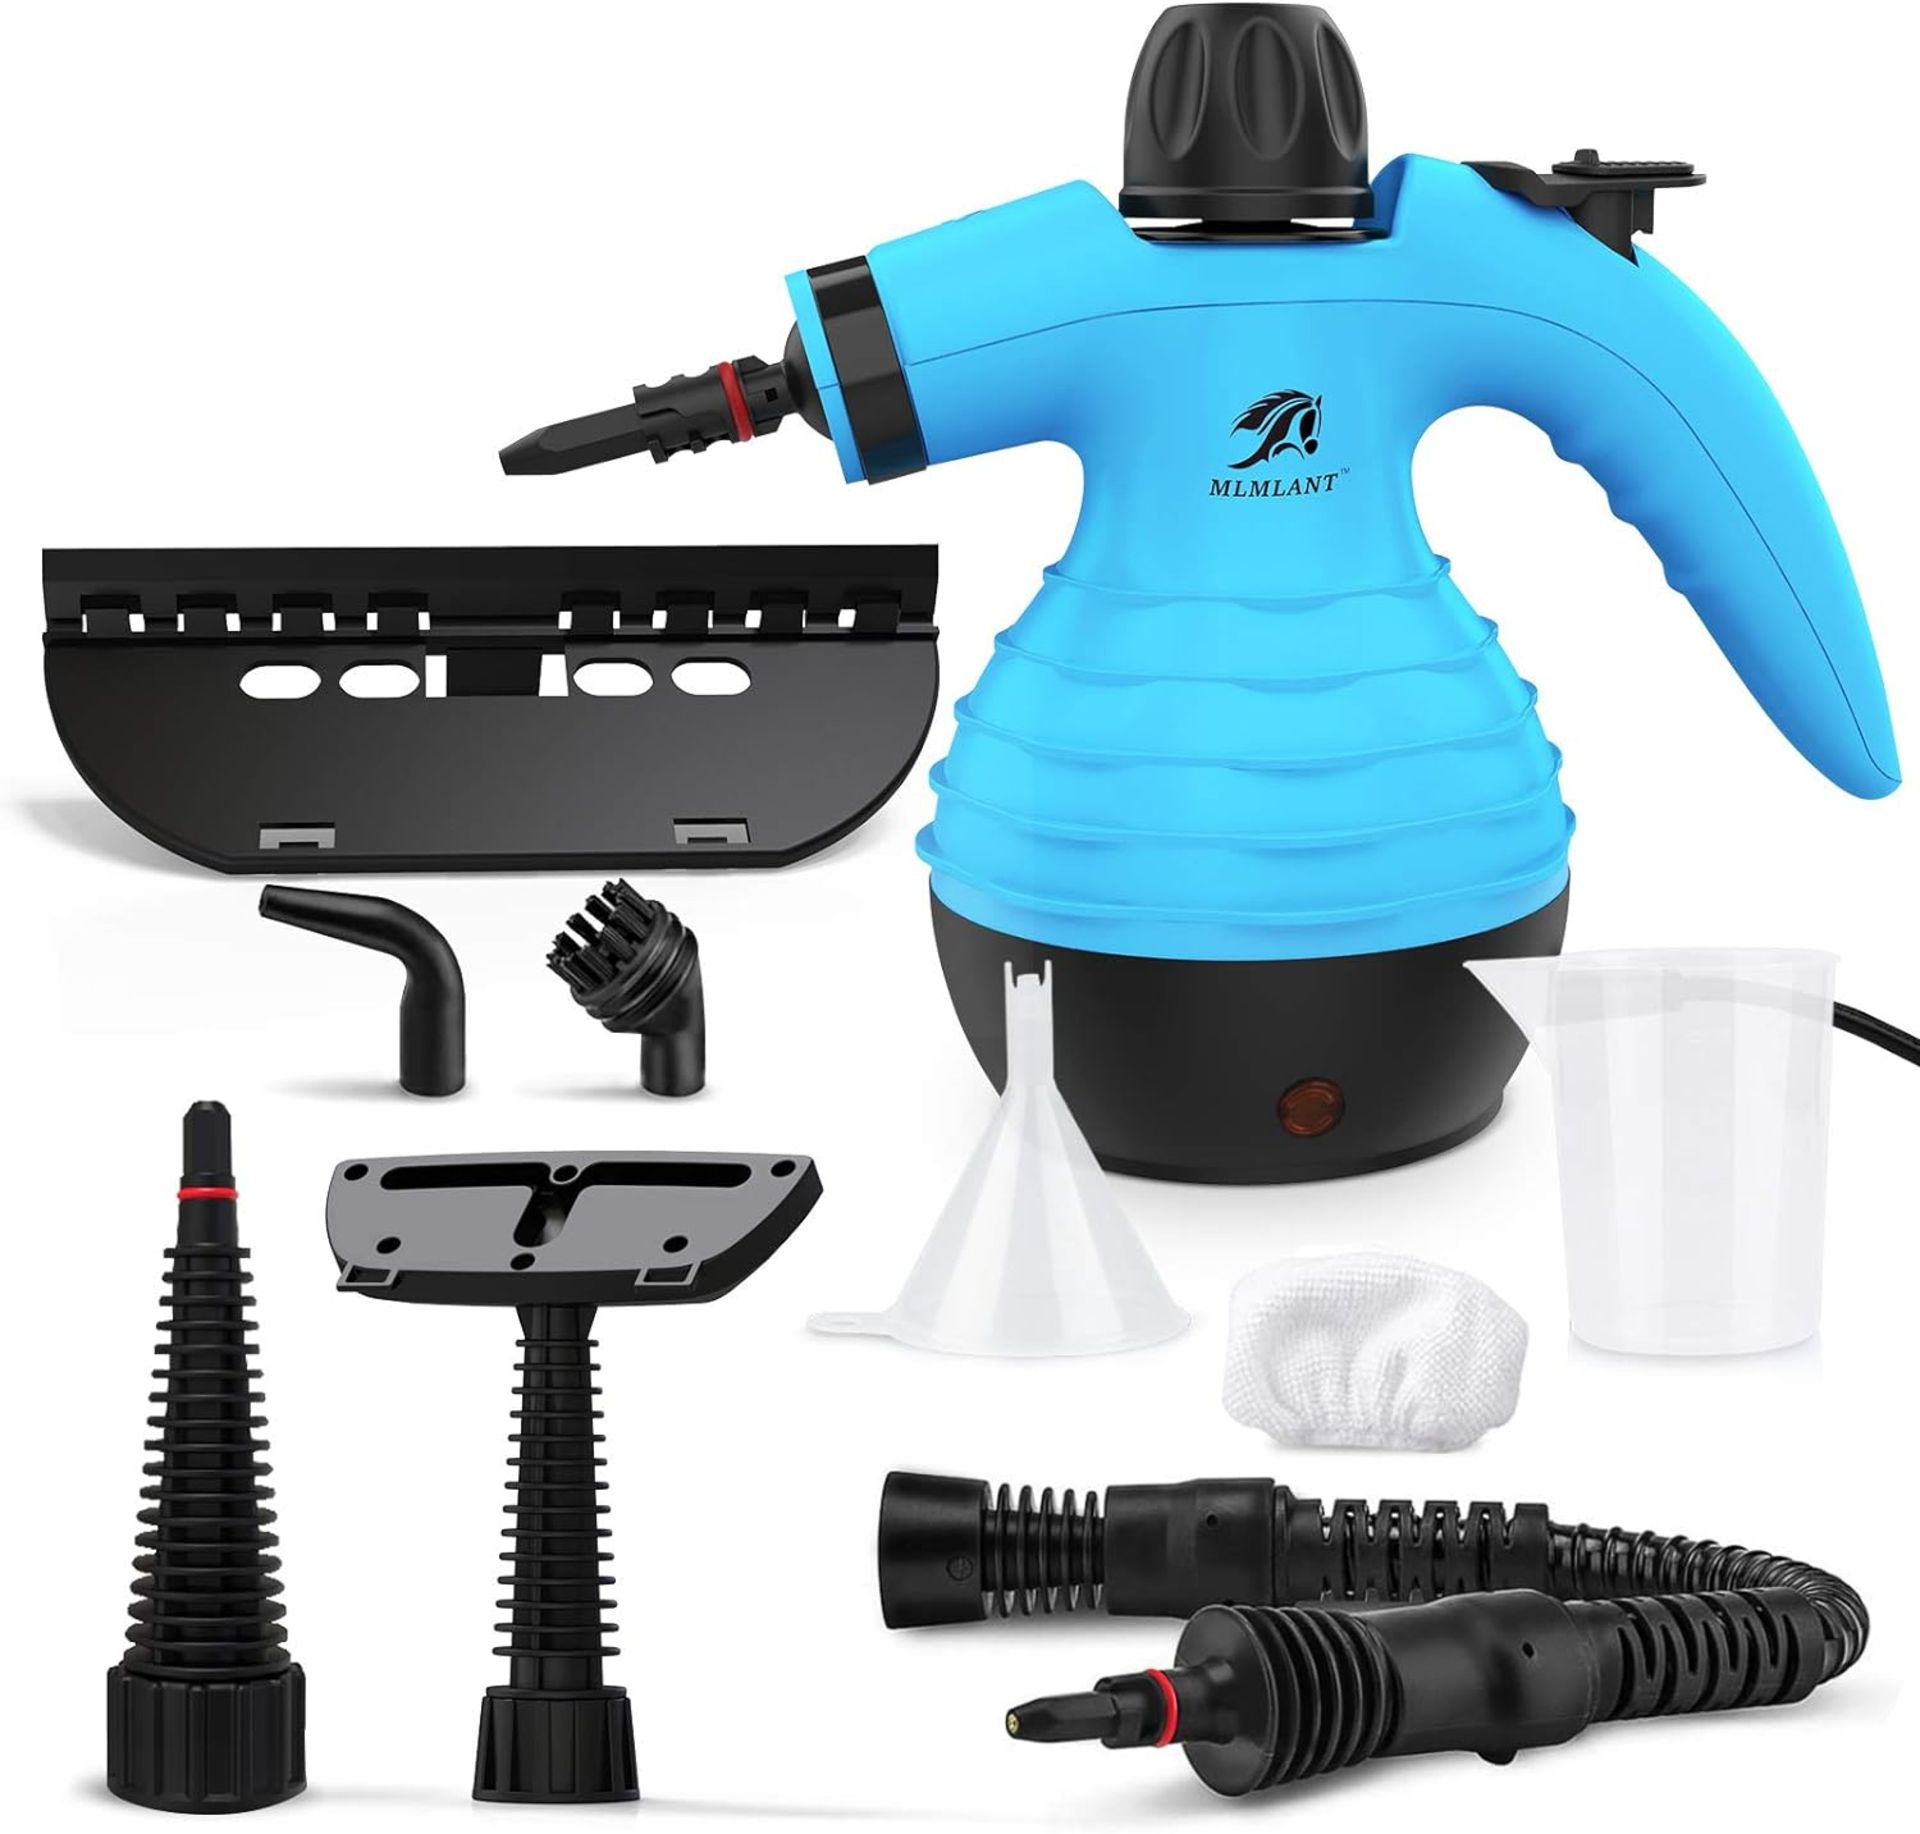 RRP £39.99 MLMLANT Hand Held Steam Cleaner for Cleaning The Home Multi Purpose Steam Cleaner